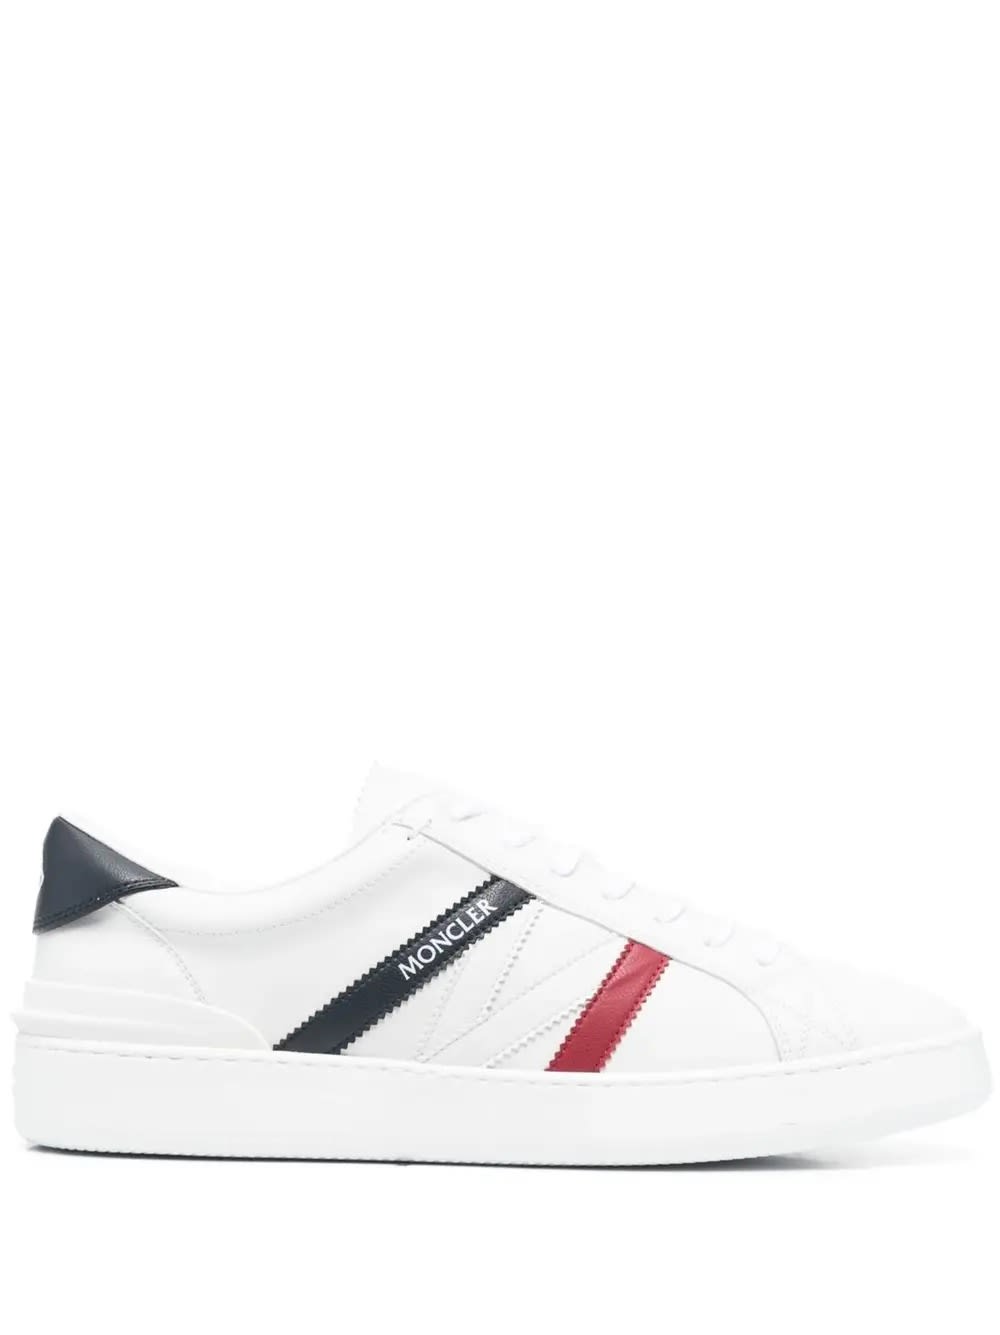 Shop Moncler Monaco M Sneakers In White, Blue And Red